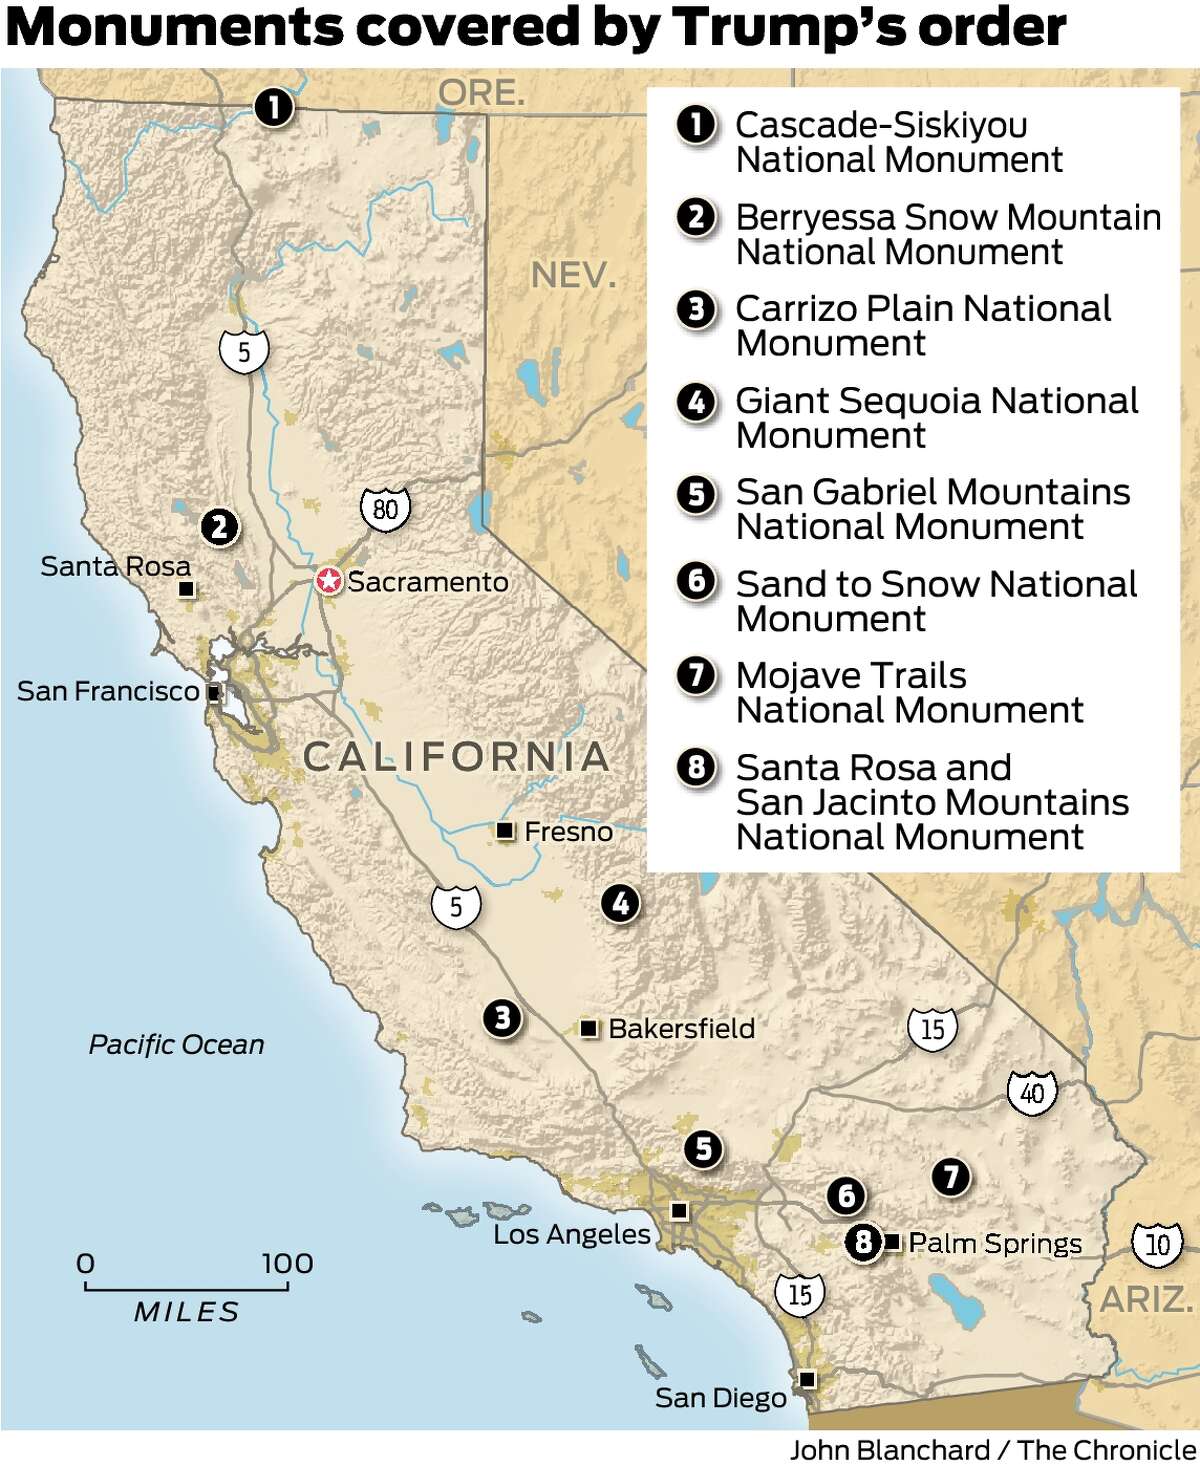 National Monuments Under Siege By Trump Include 8 In California